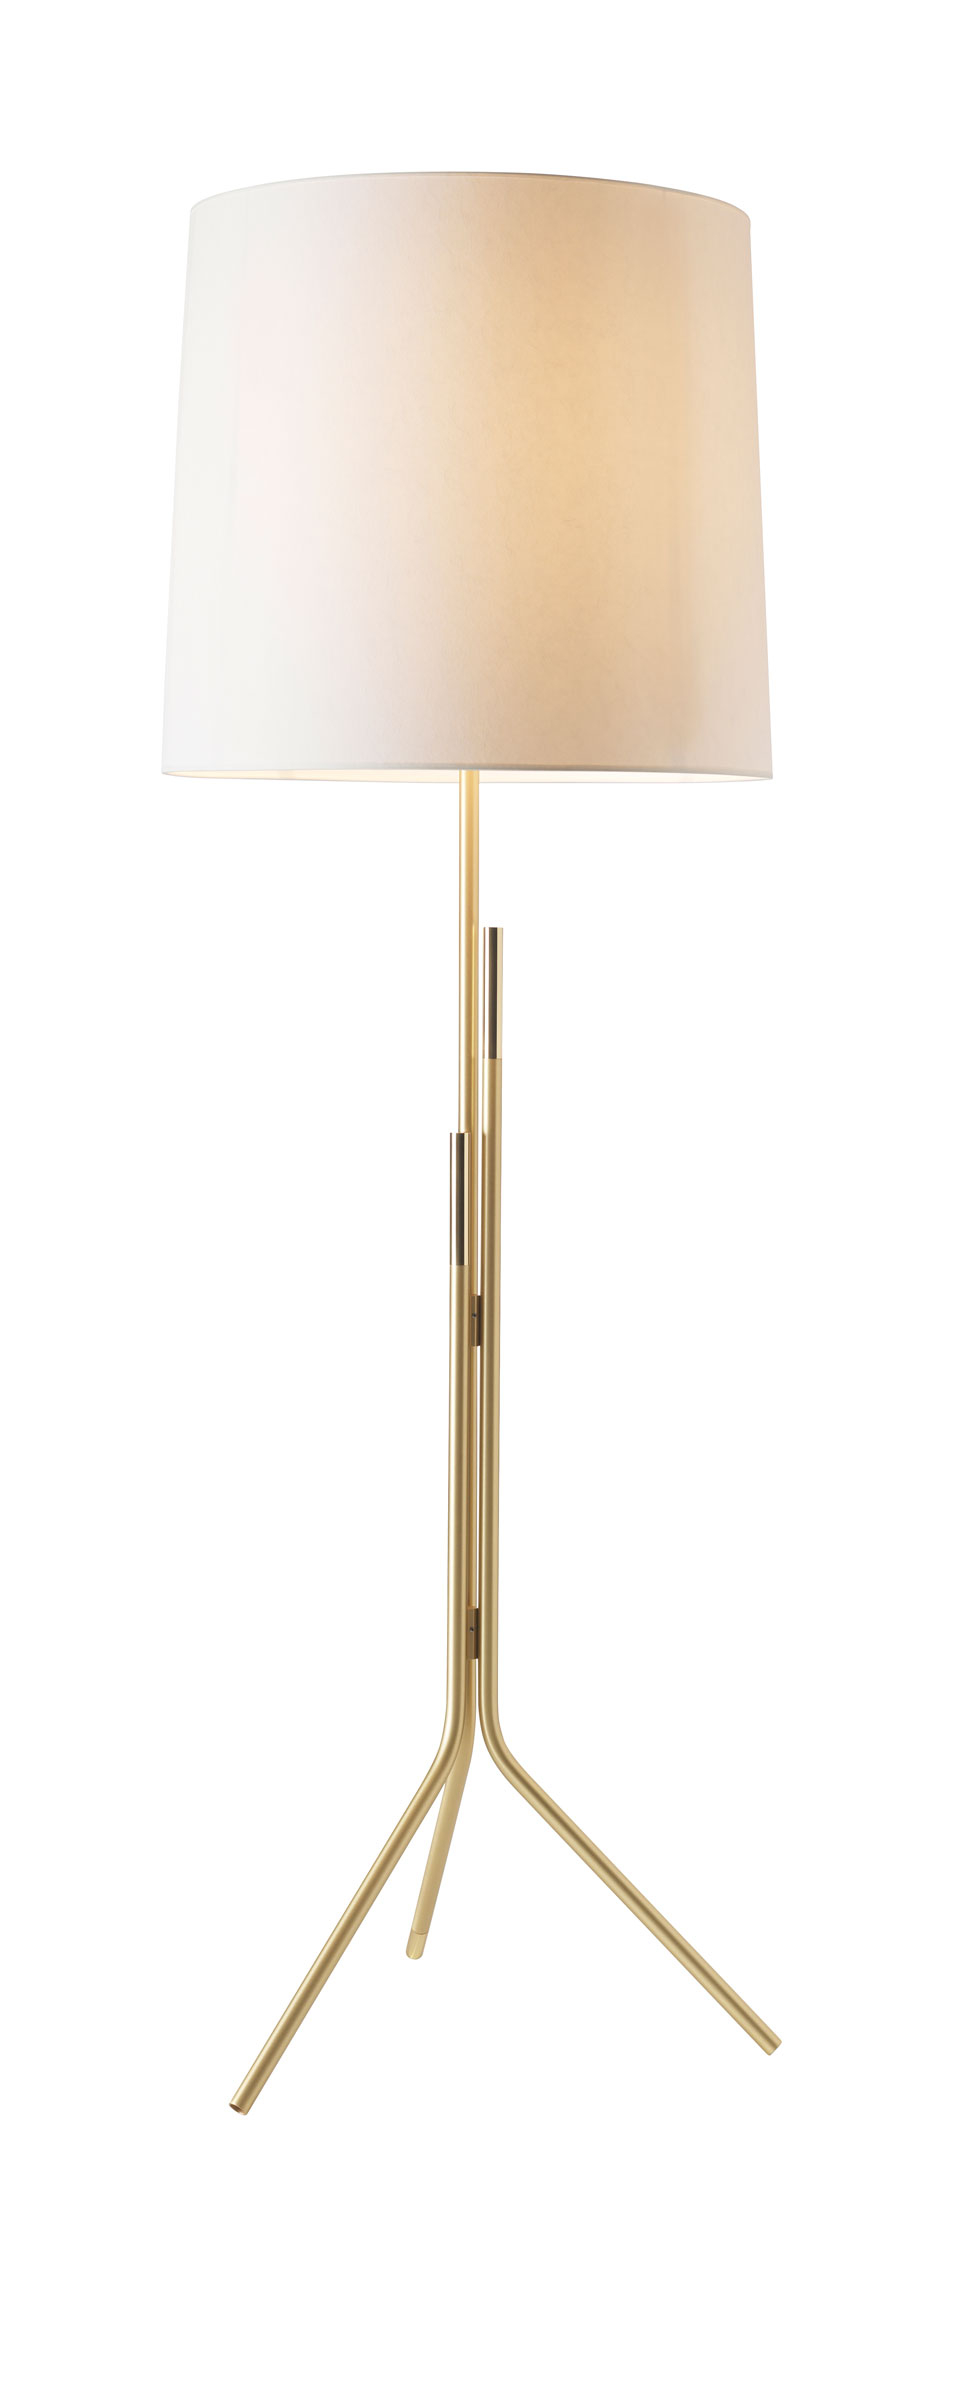 Contemporary Floor Lamp Brass Stand Cylindrical Shade In White Drop Paper Design Herv Langlais throughout proportions 960 X 2399